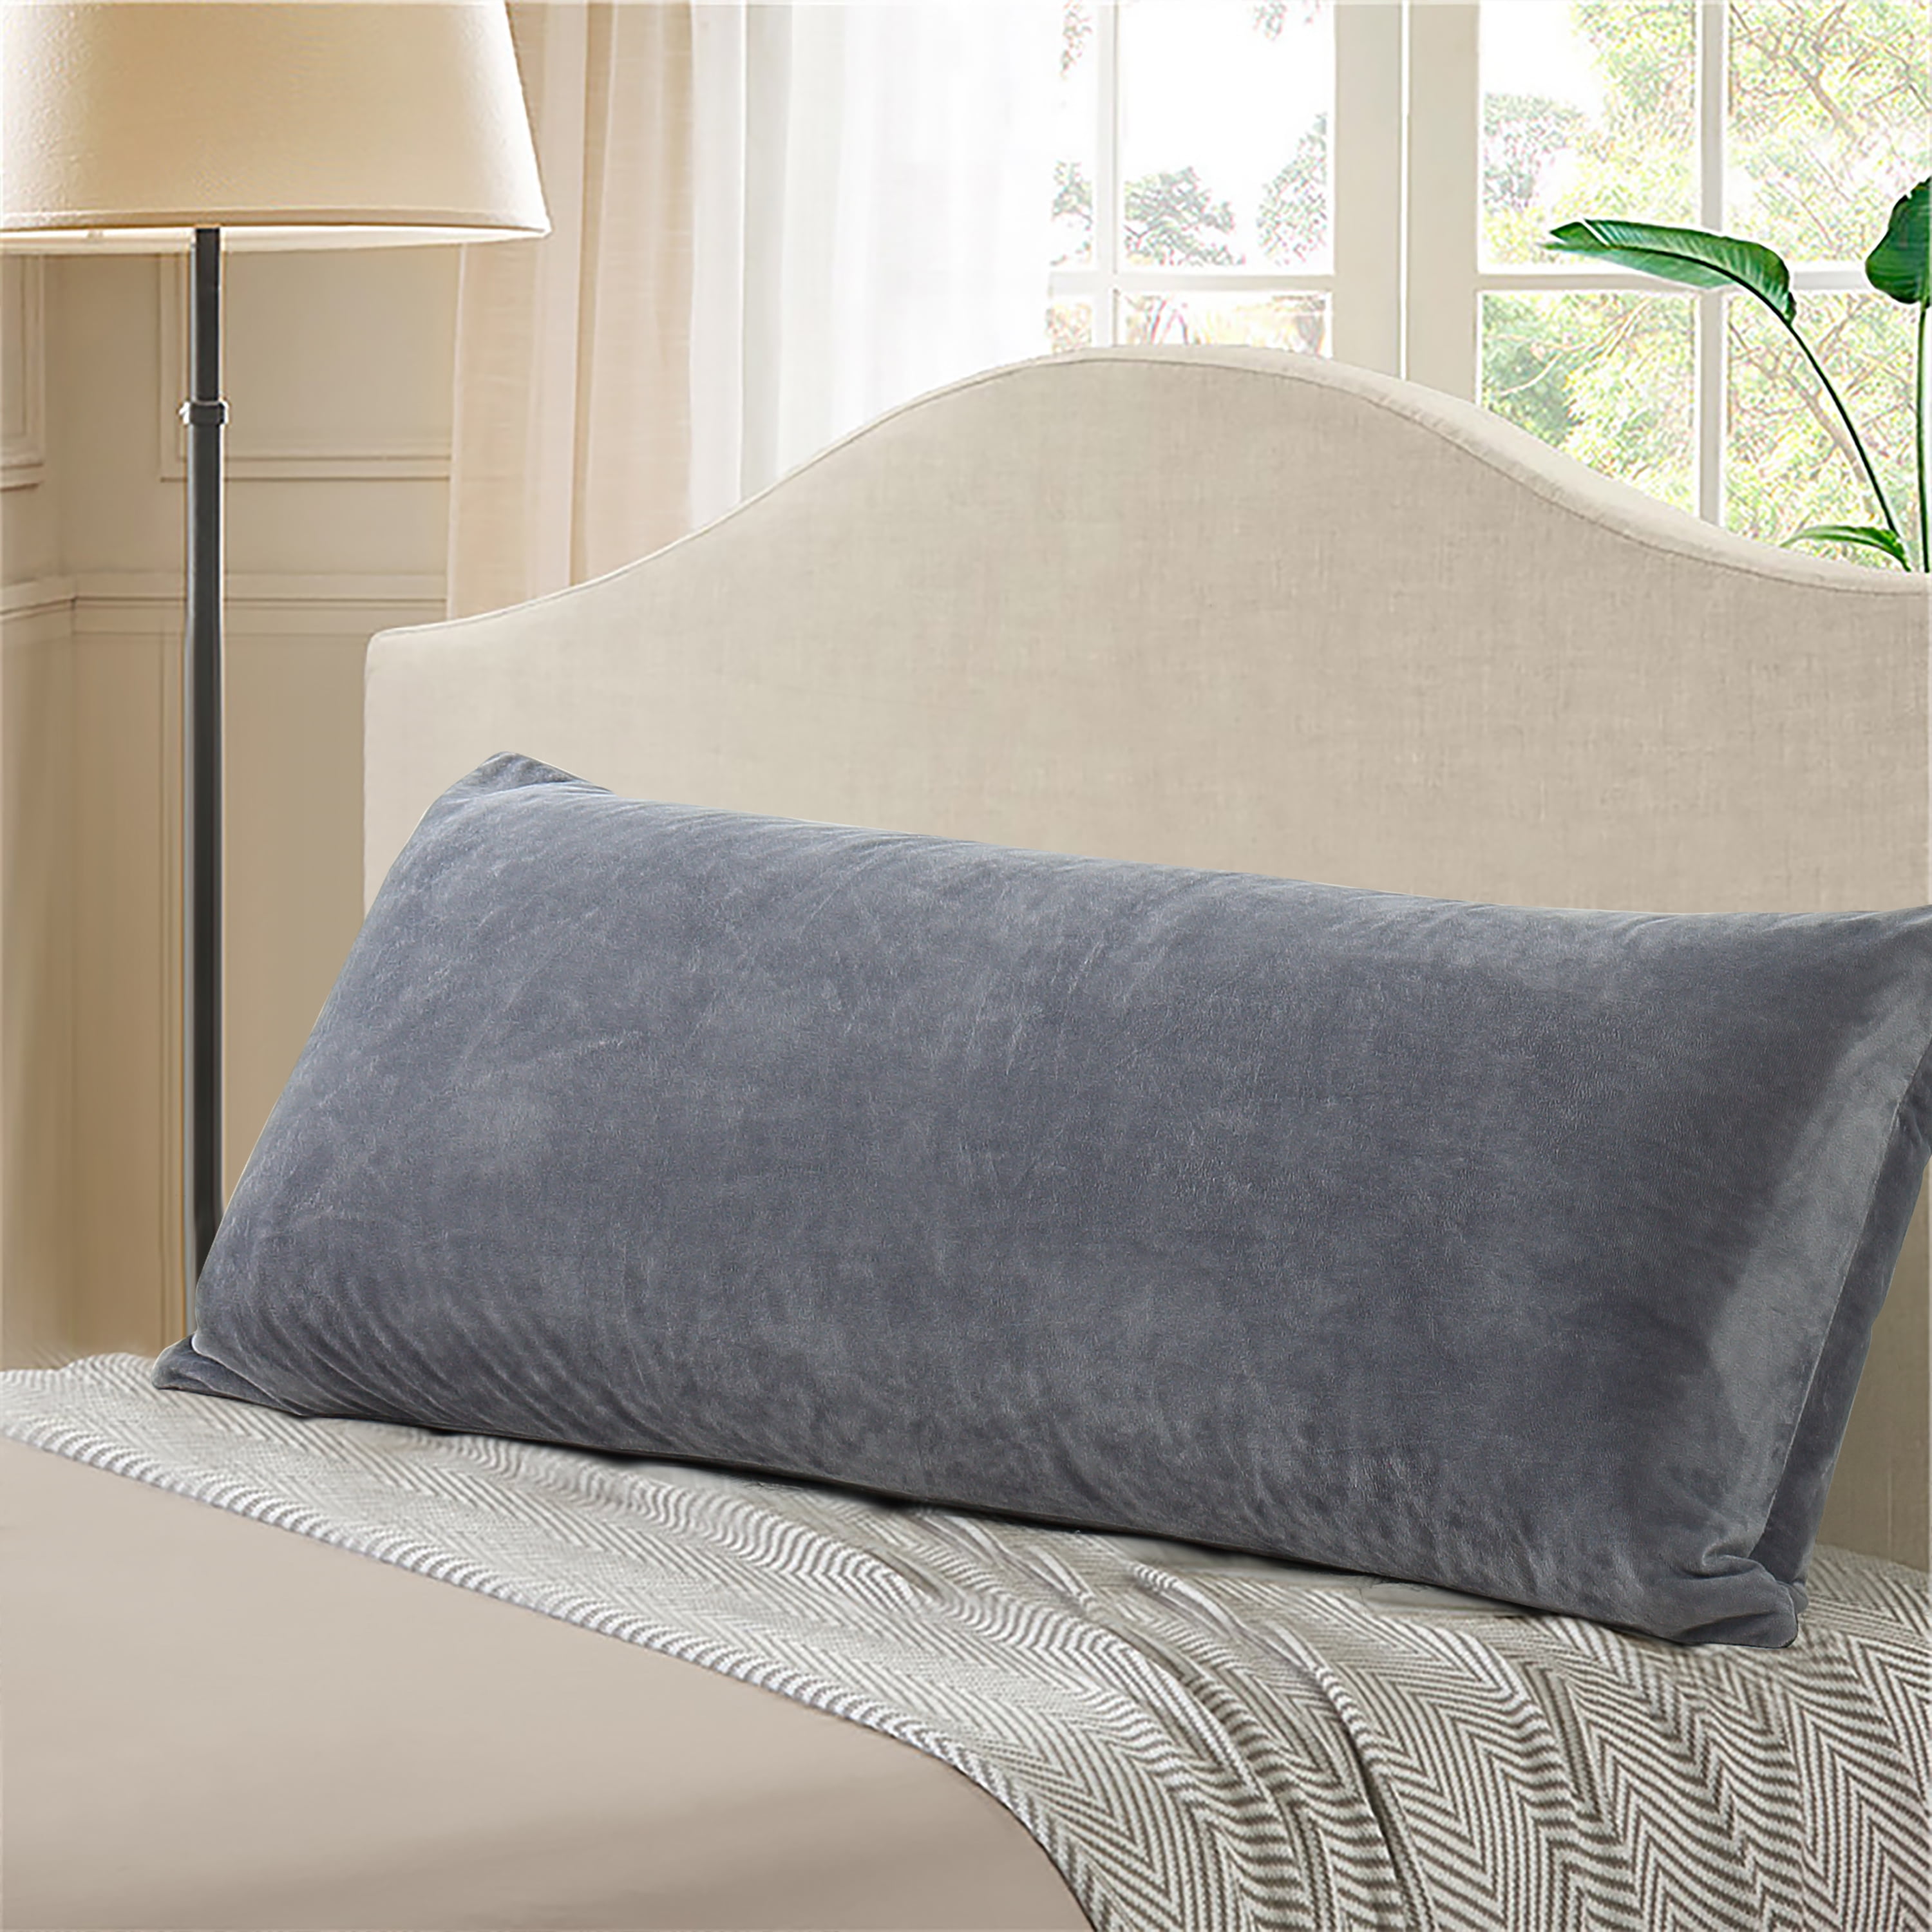 Si Details about   Reafort Ultra Soft Sherpa Body Pillow Cover/Case with Zipper Closure 21"x54" 